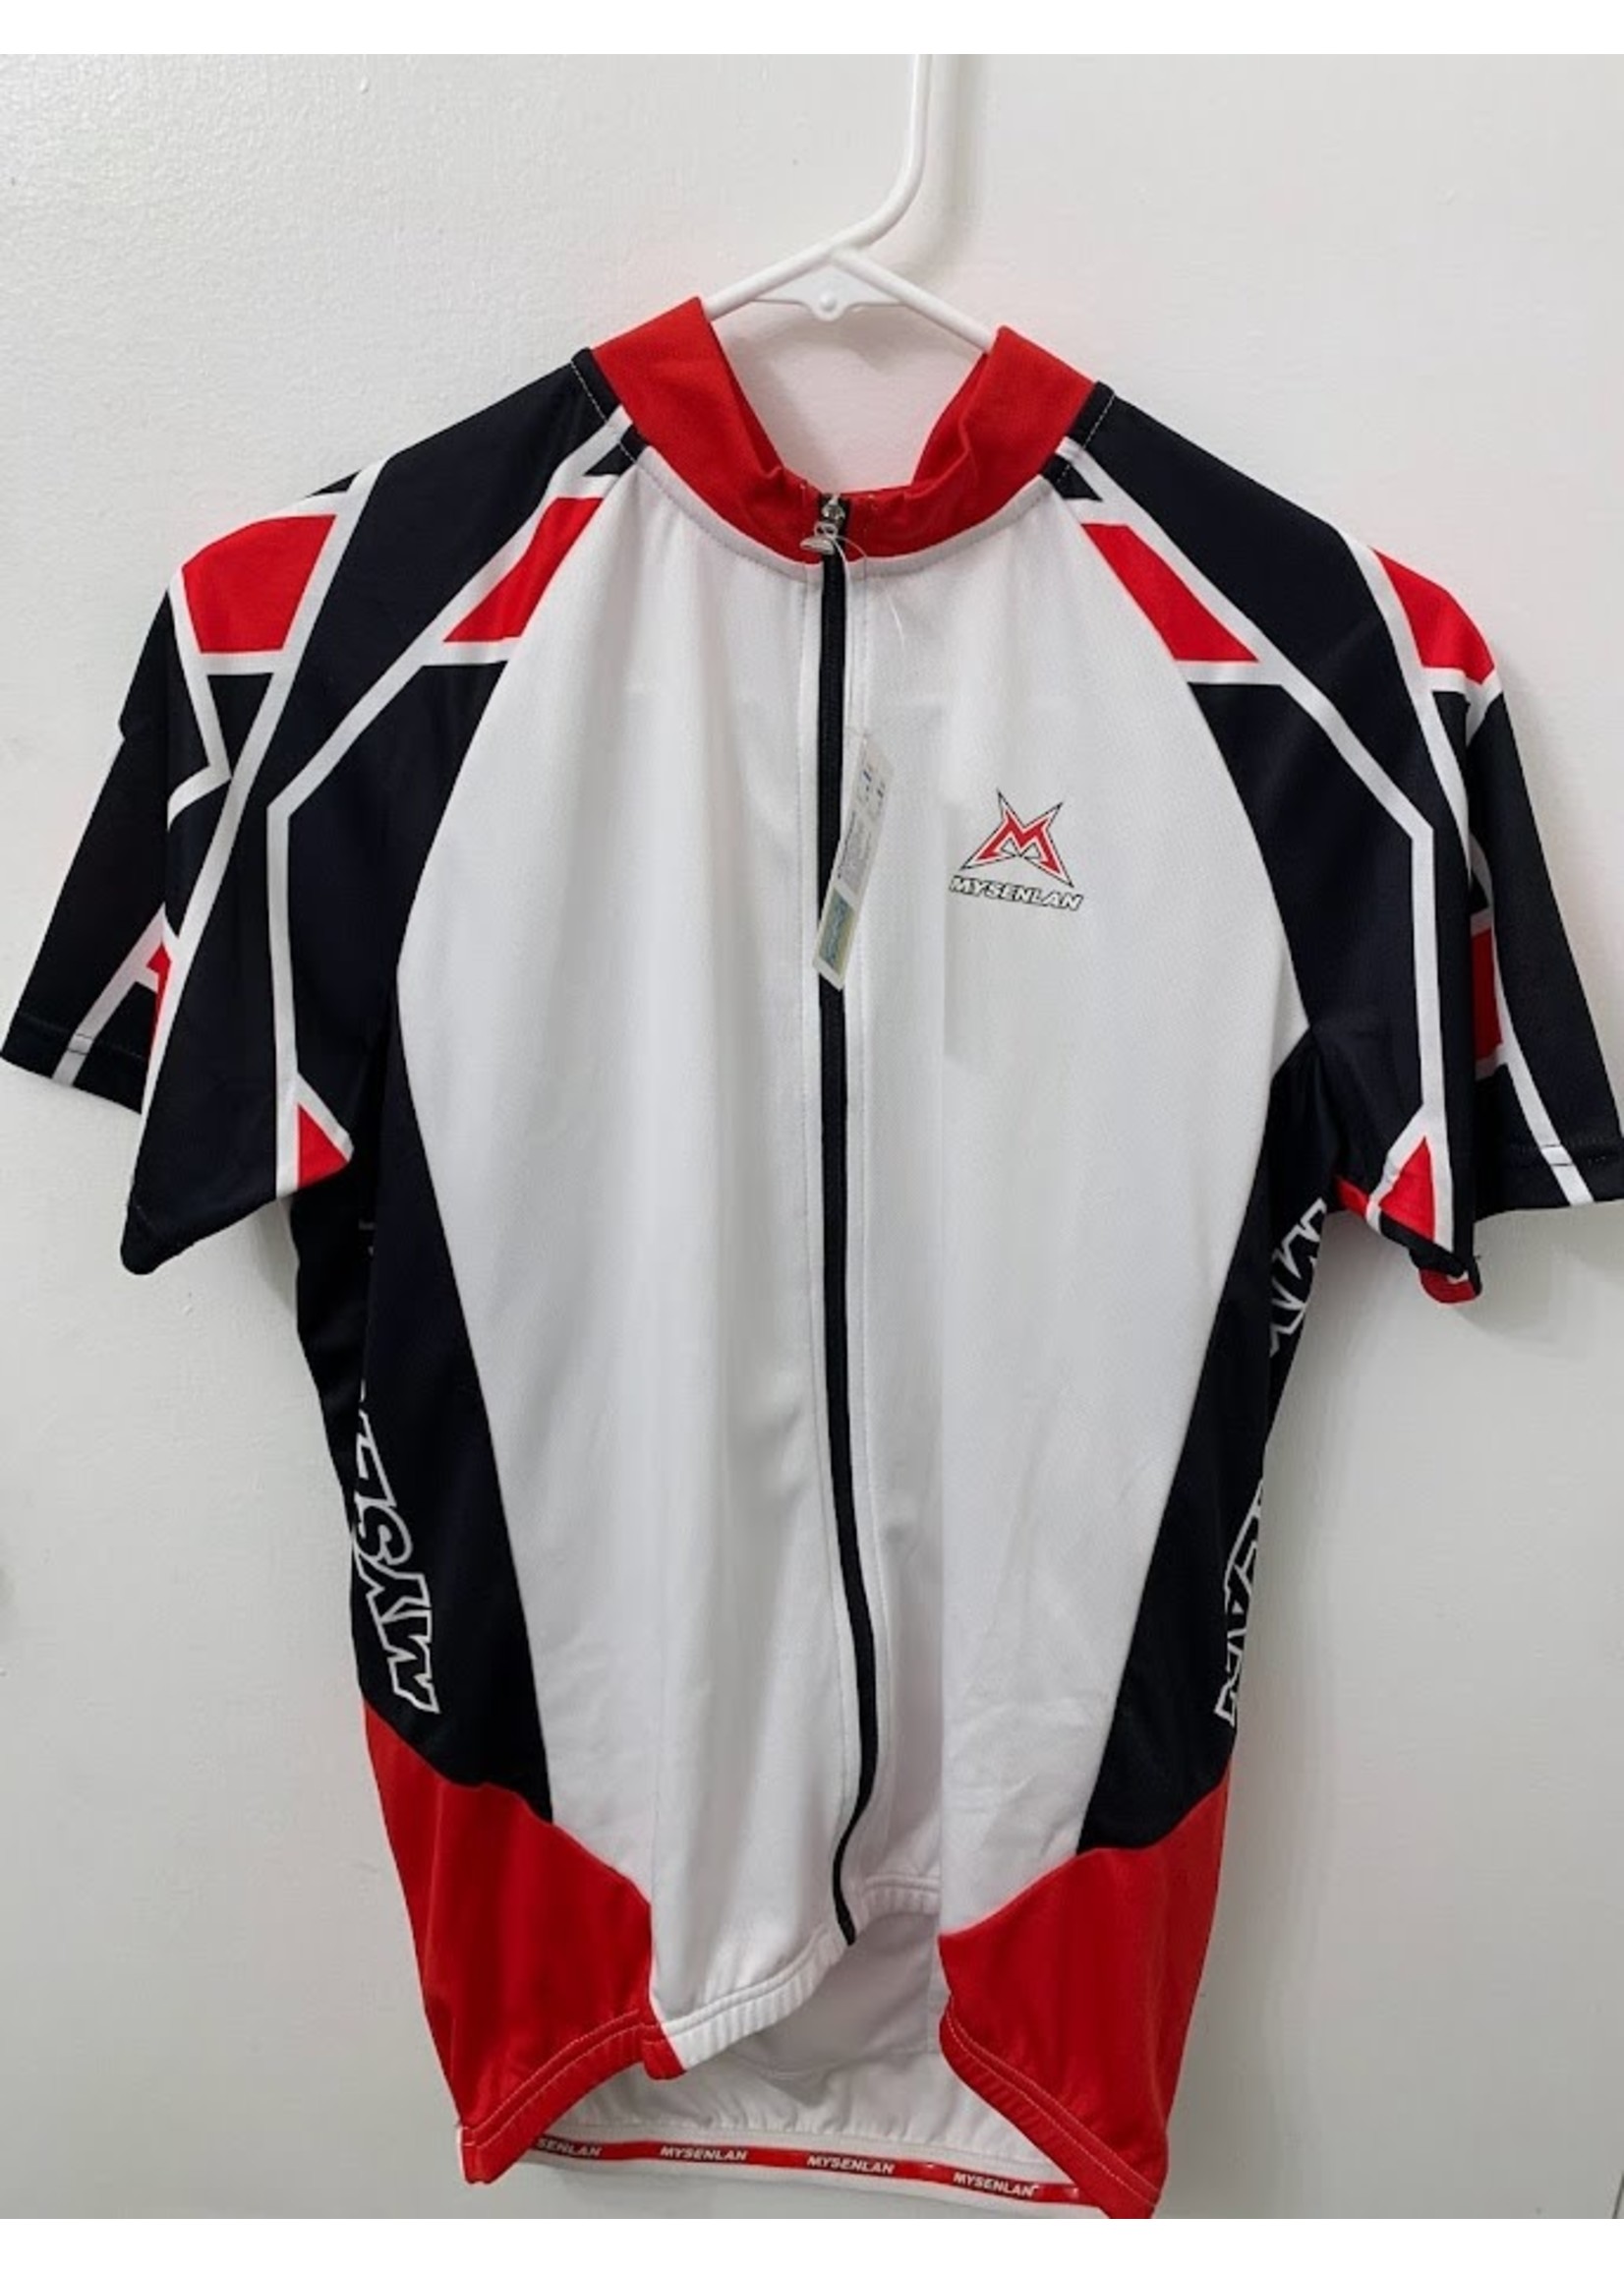 Mysenlan Men's Jersey+Shorts White/Red/Black - Bikes For All